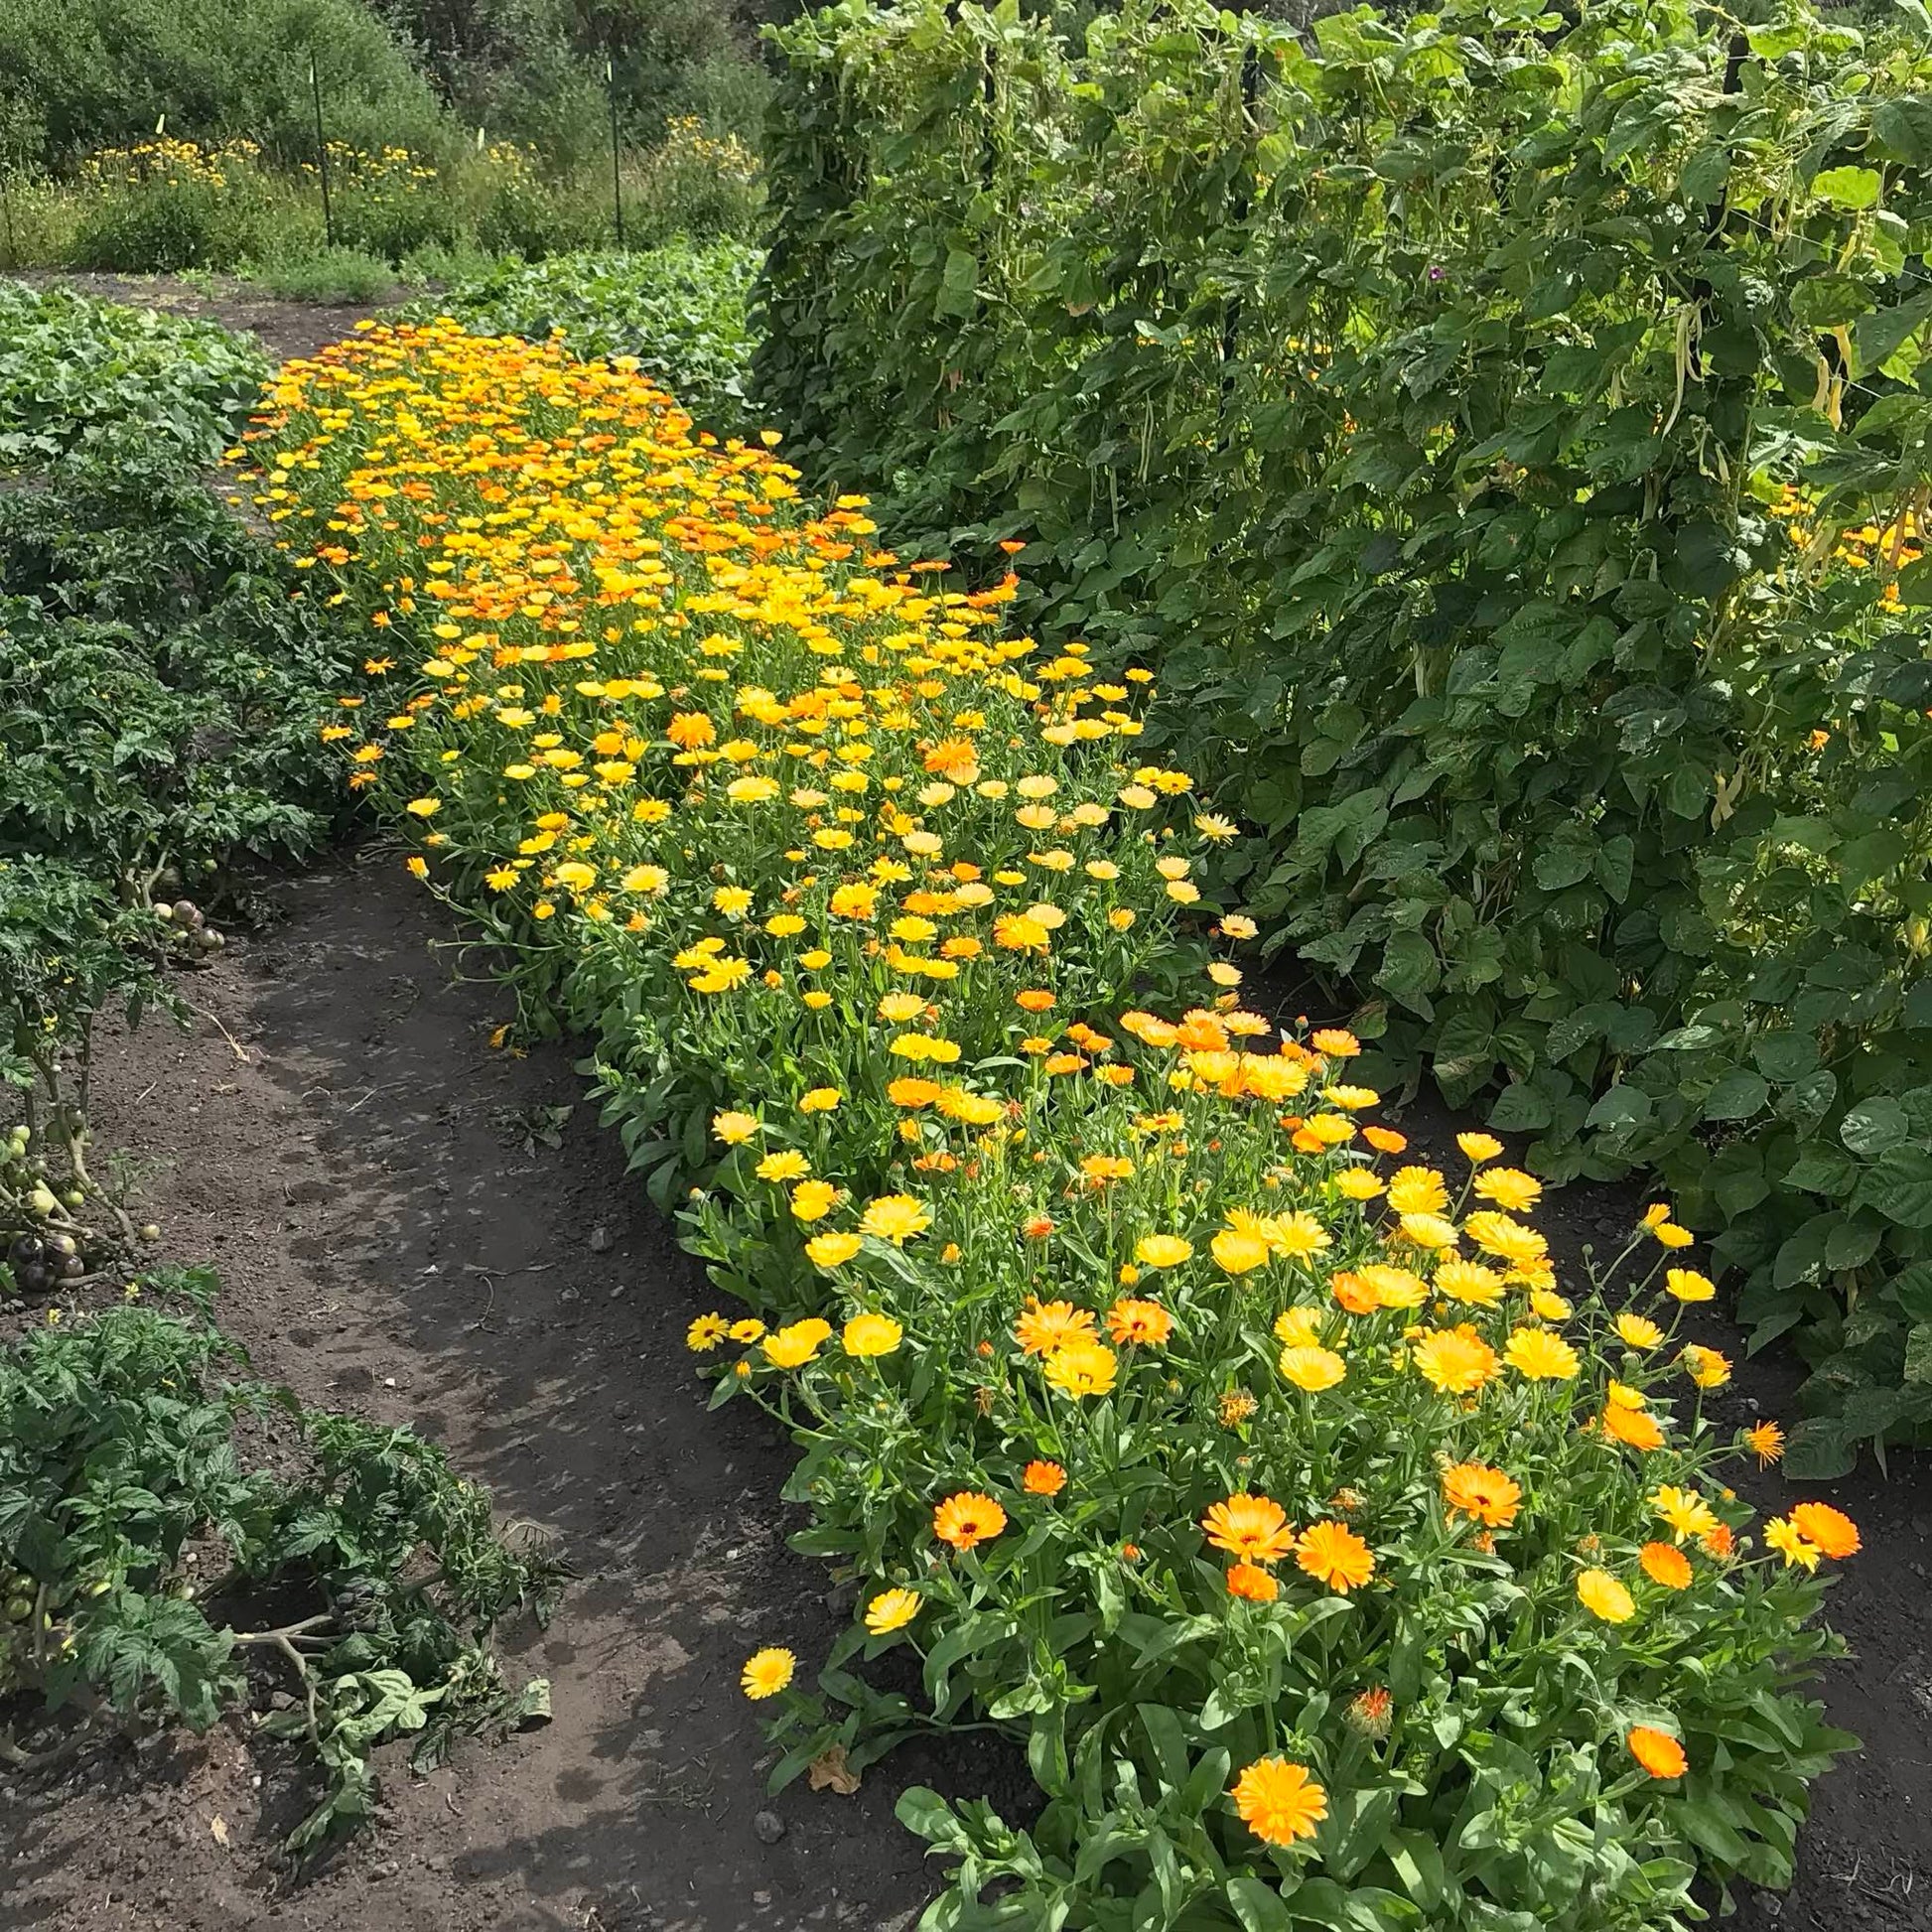 Twenty foot bed of calendula flowers in front of a trellis of pole beans.